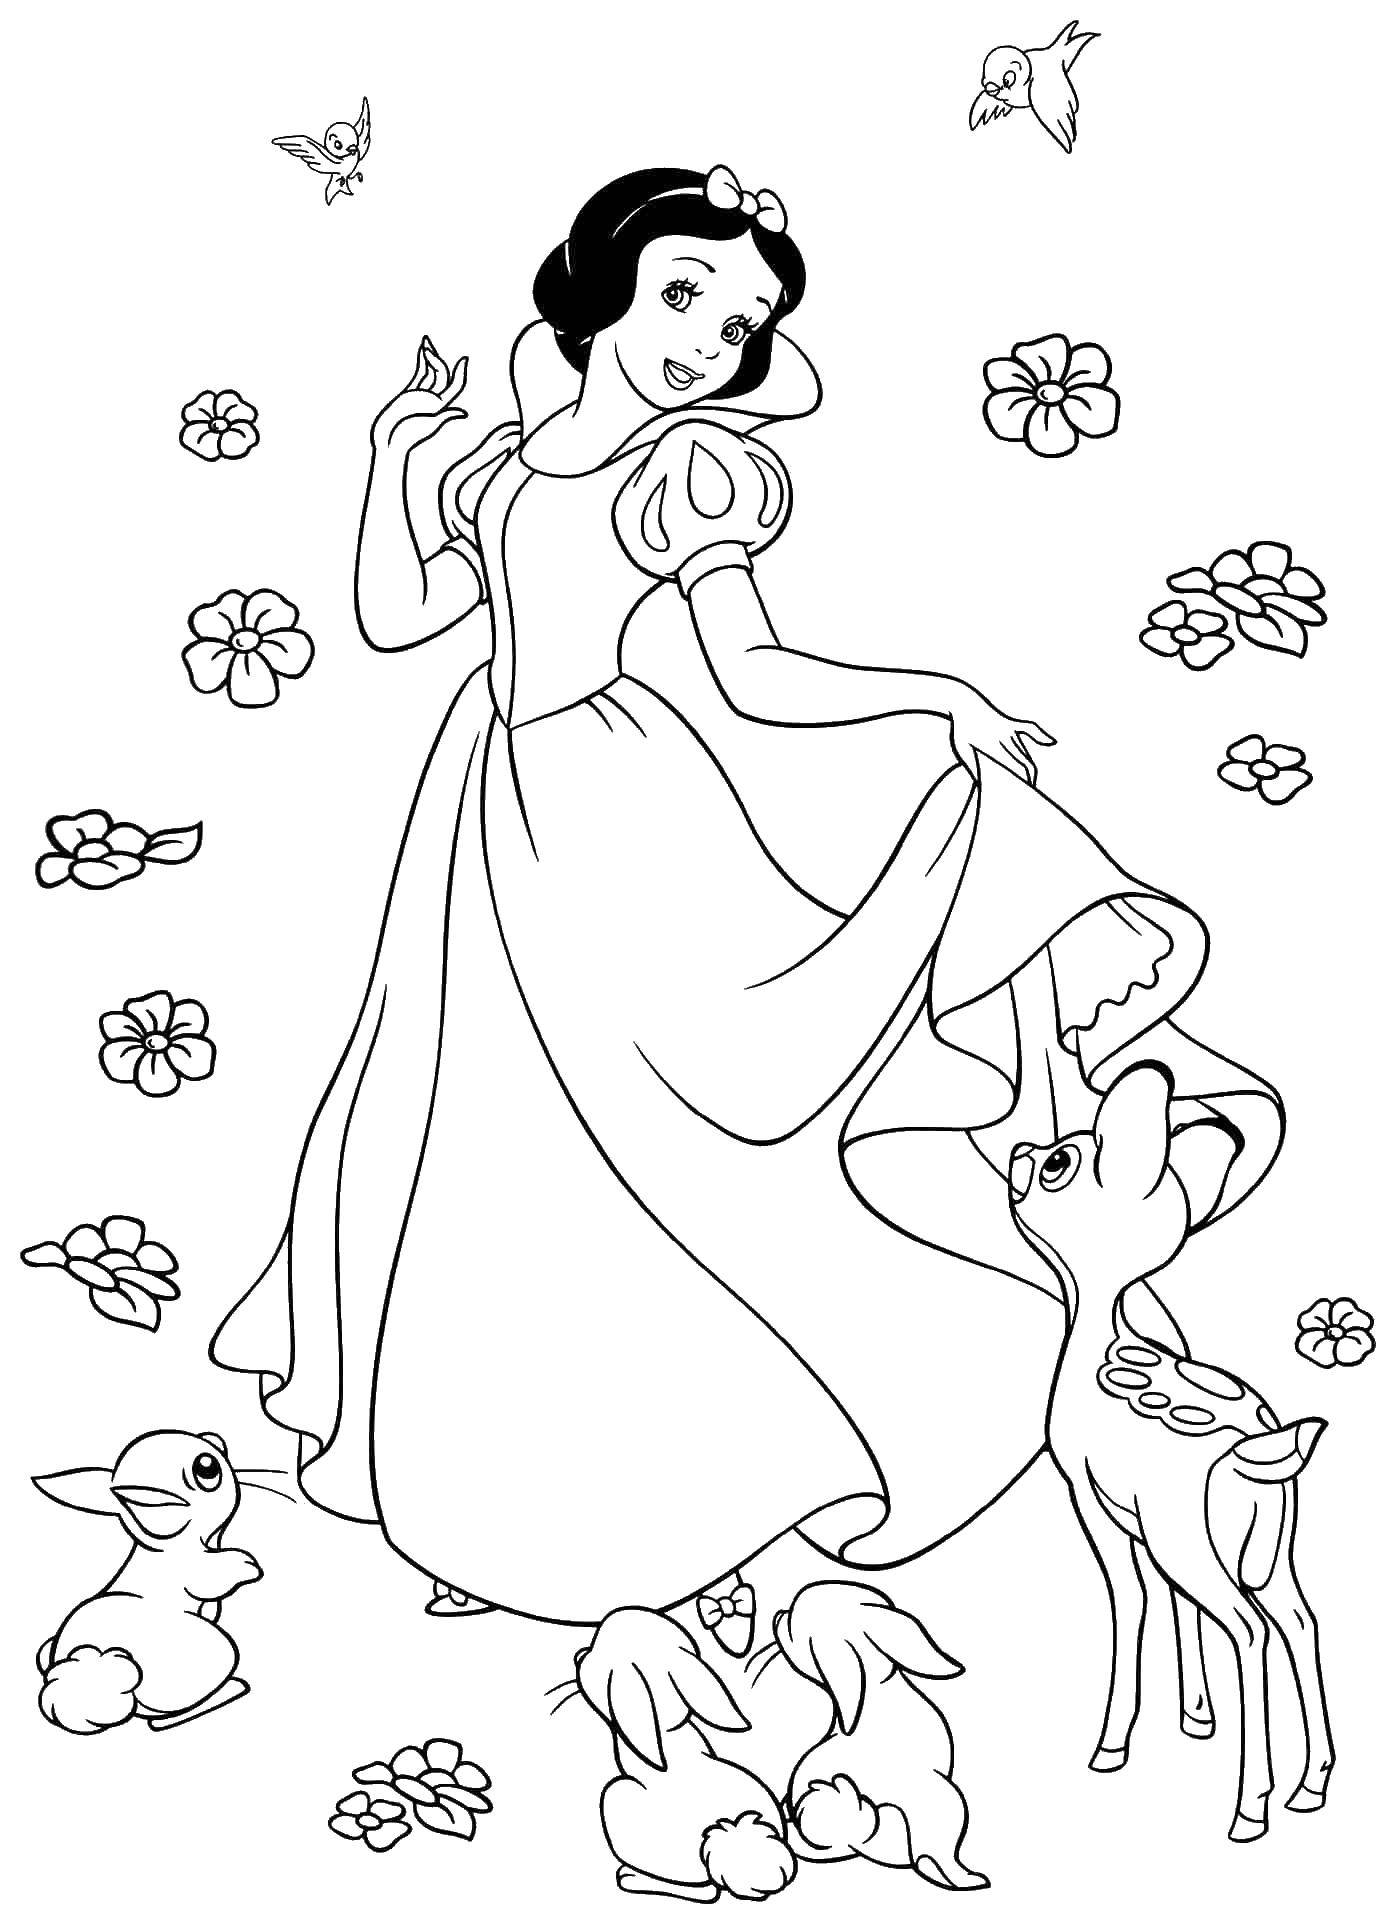 Coloring Snow white and animals. Category snow white. Tags:  princesses, cartoons, fairy tales, Snow white.